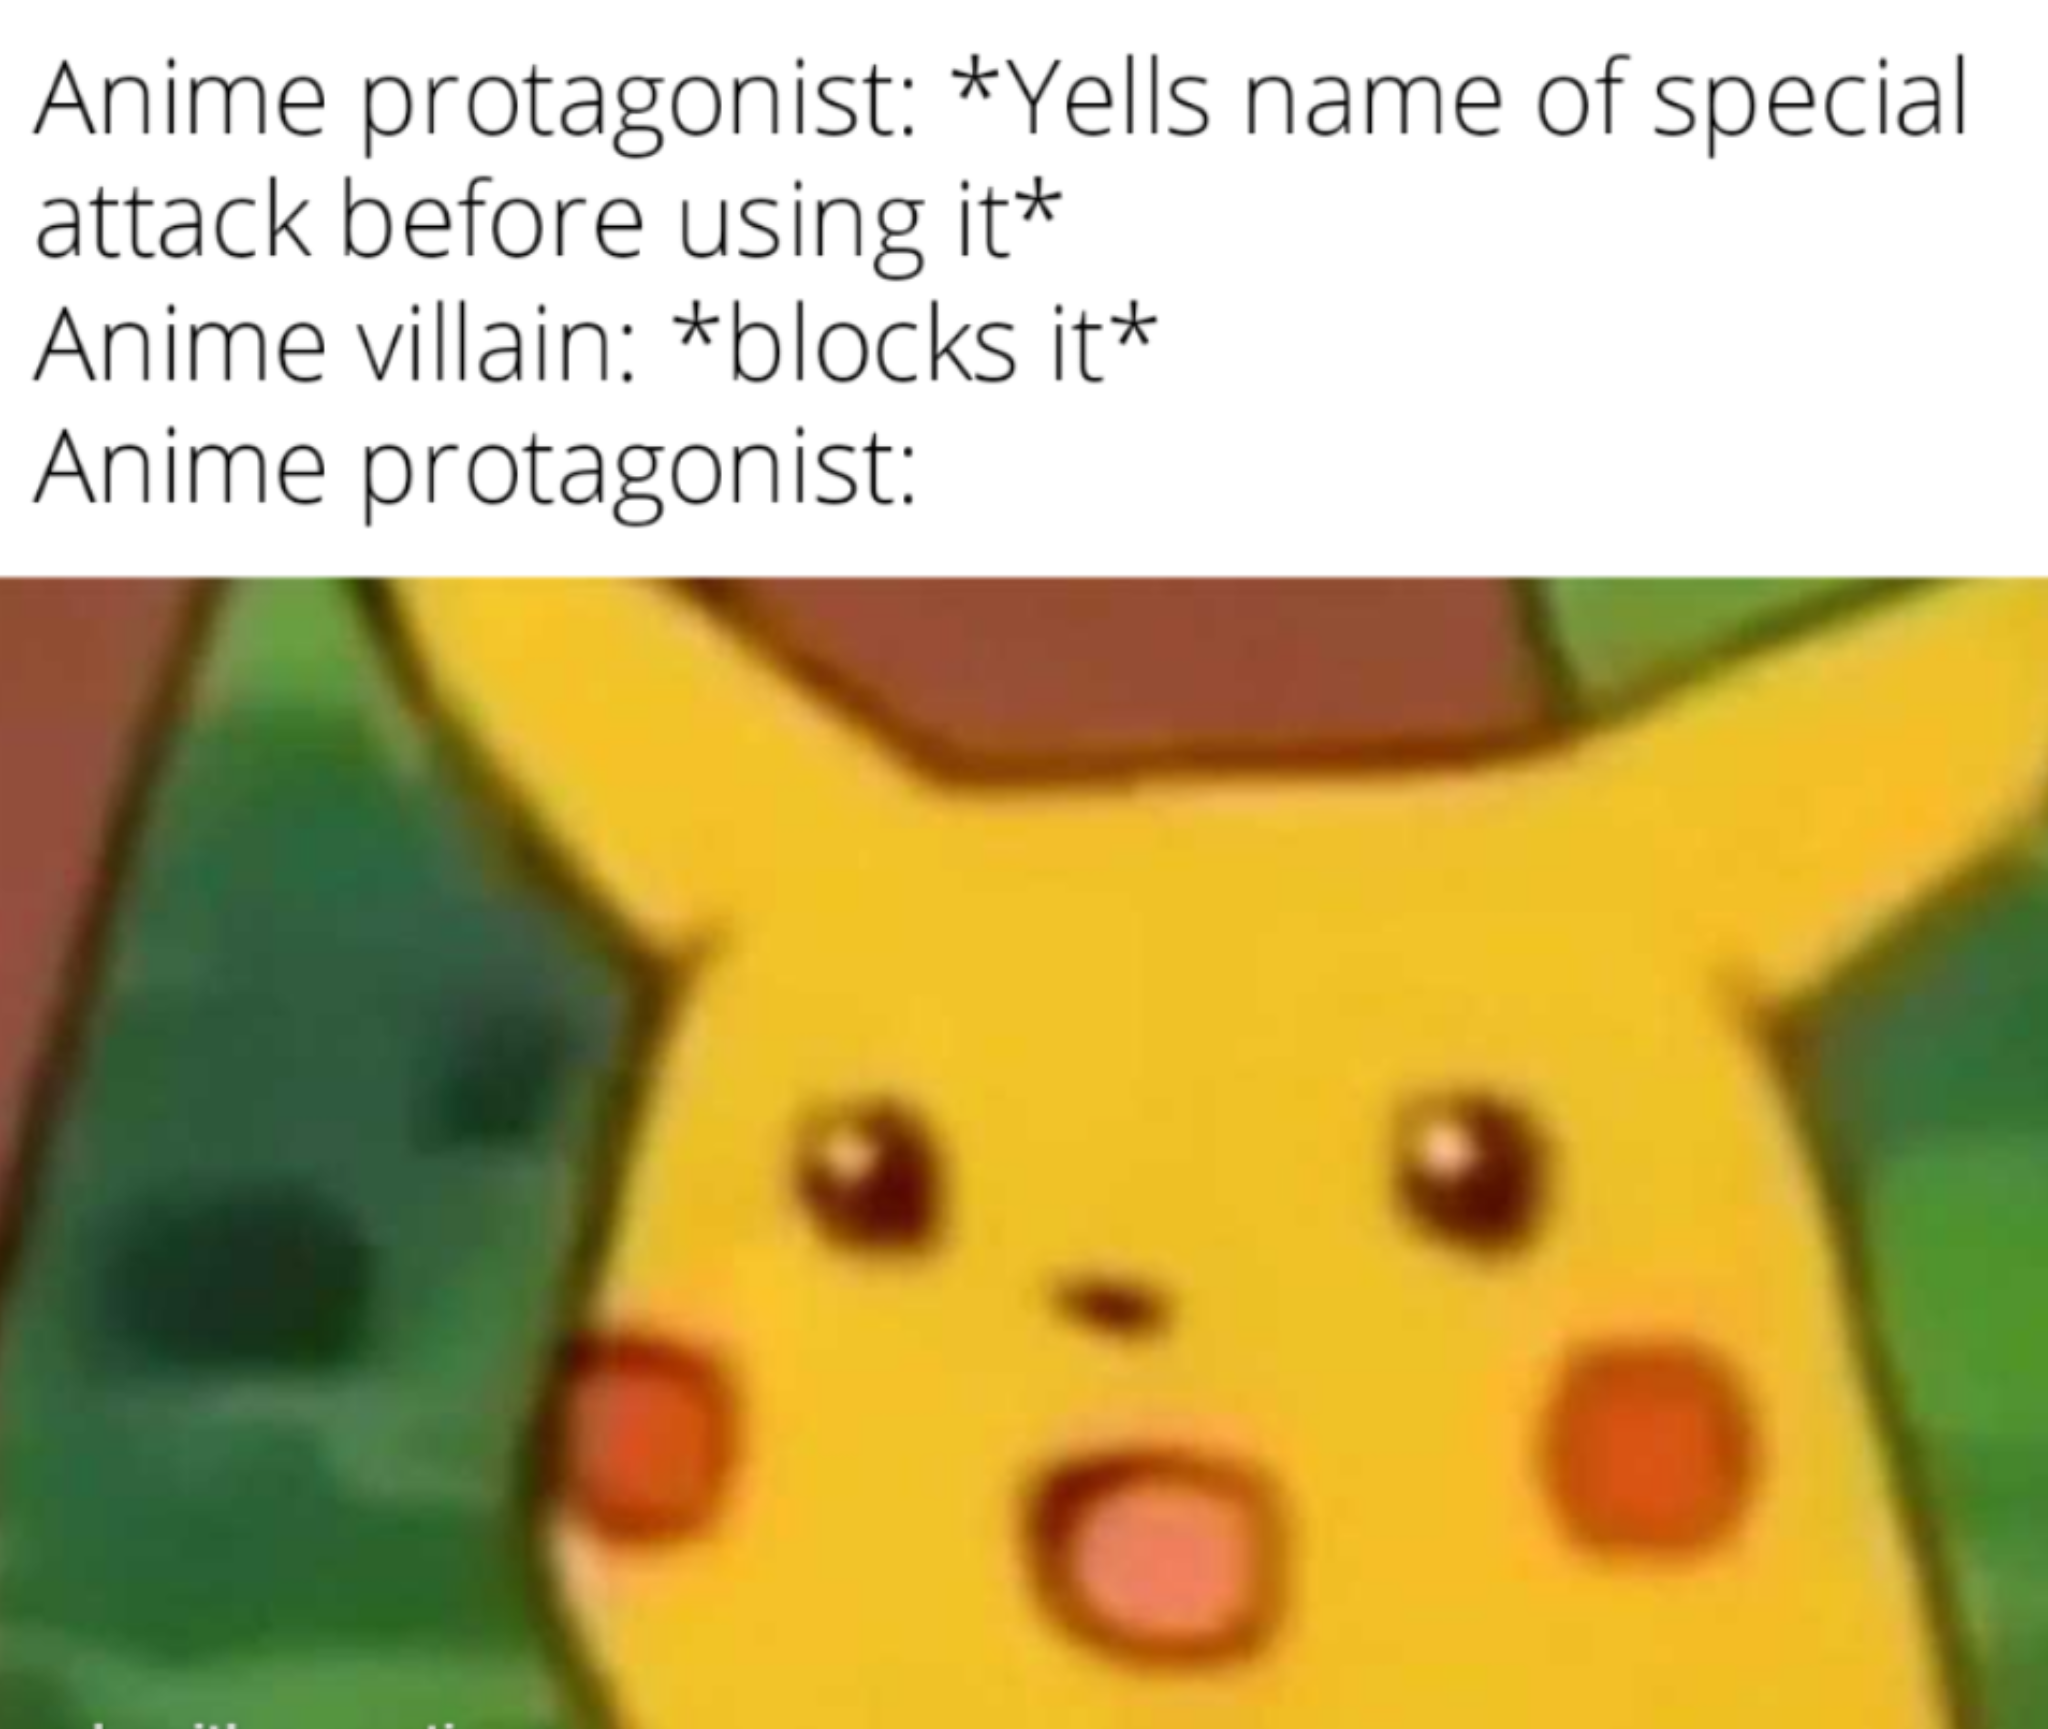 dank memes - funny memes - pikachu - Anime protagonist Yells name of special attack before using it Anime villain blocks it Anime protagonist O